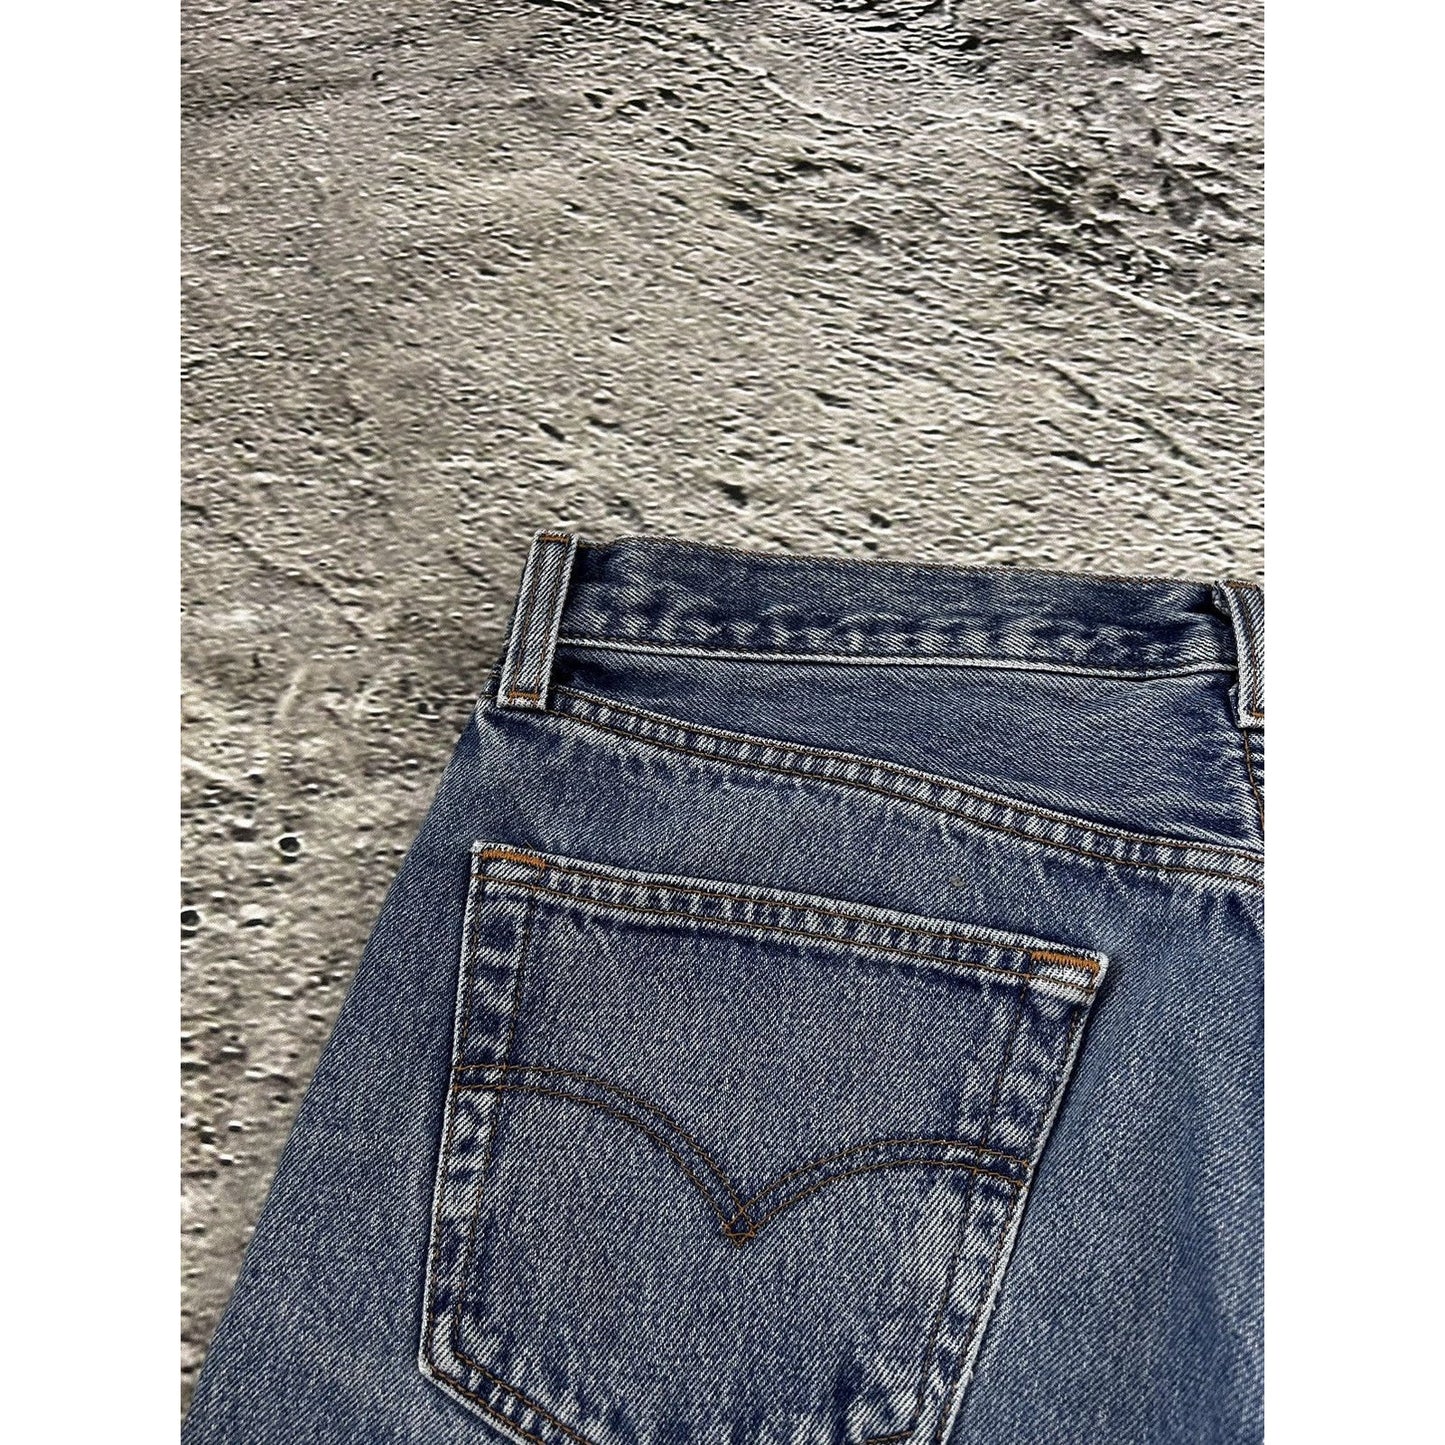 Levi’s 501 vintage blue jeans denim pants 90s made in Mexico